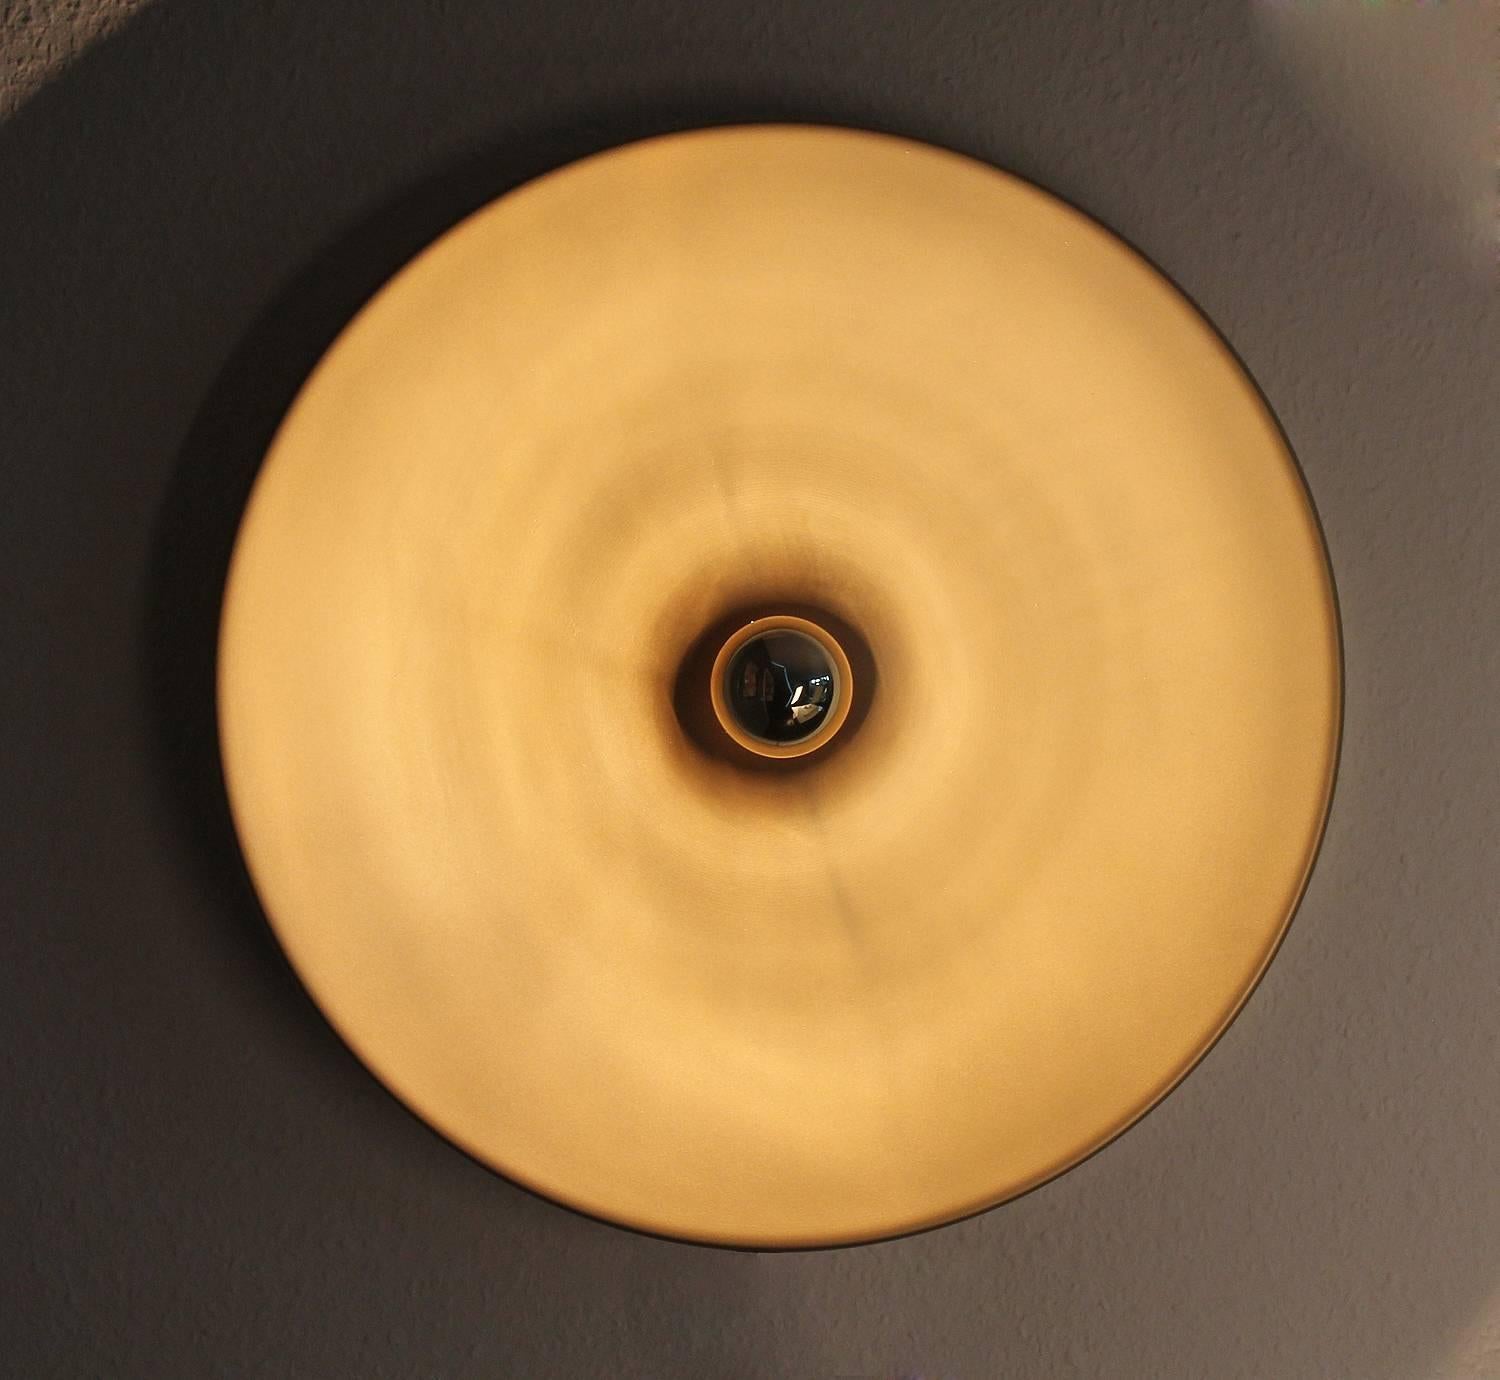 Pair of very large bronze enameled disc shaped sconces in the style of Stilnovo, beautiful minimalistic statement with a smooth lighting effect - best used with a mirrored tip bulb. 
Please note that the wall attachments are different for both